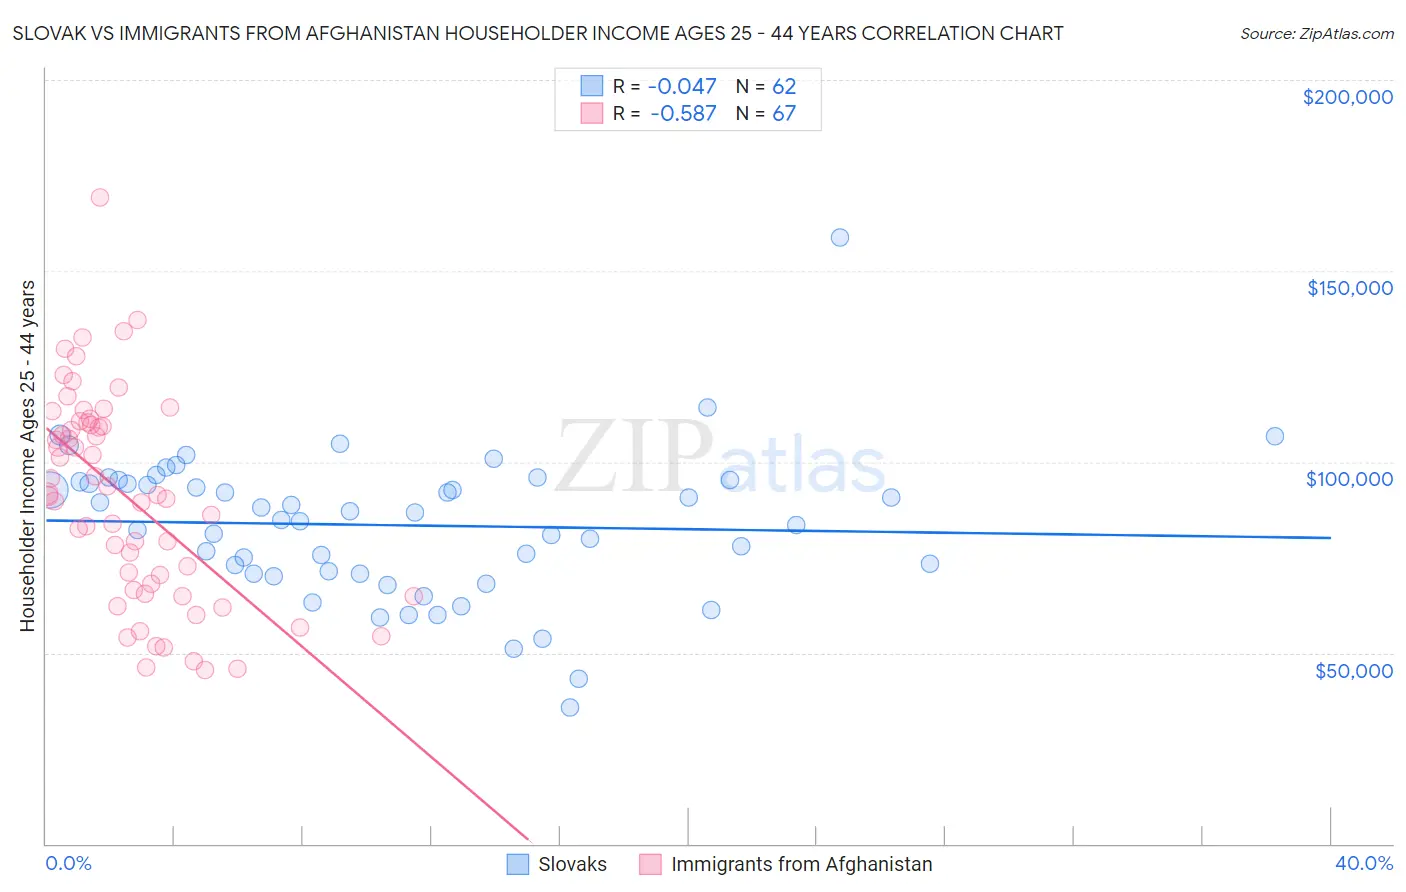 Slovak vs Immigrants from Afghanistan Householder Income Ages 25 - 44 years